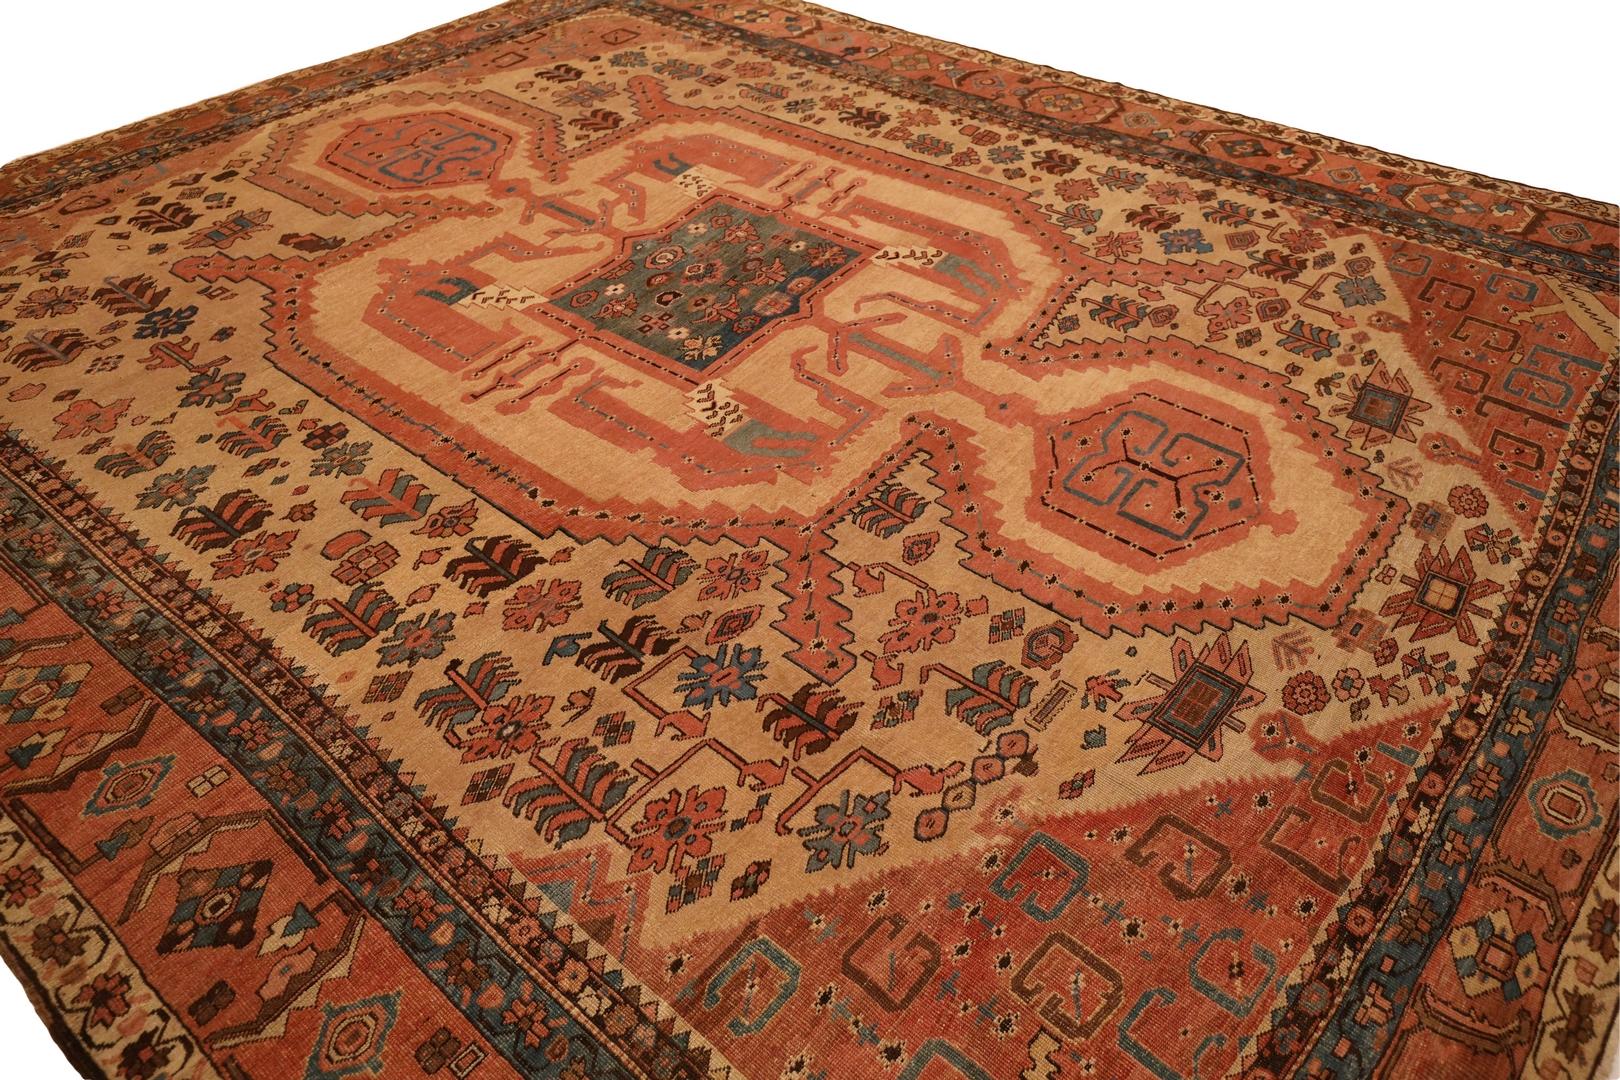 Hand-Knotted Serapi Antique Room-Size Rug - 11'10